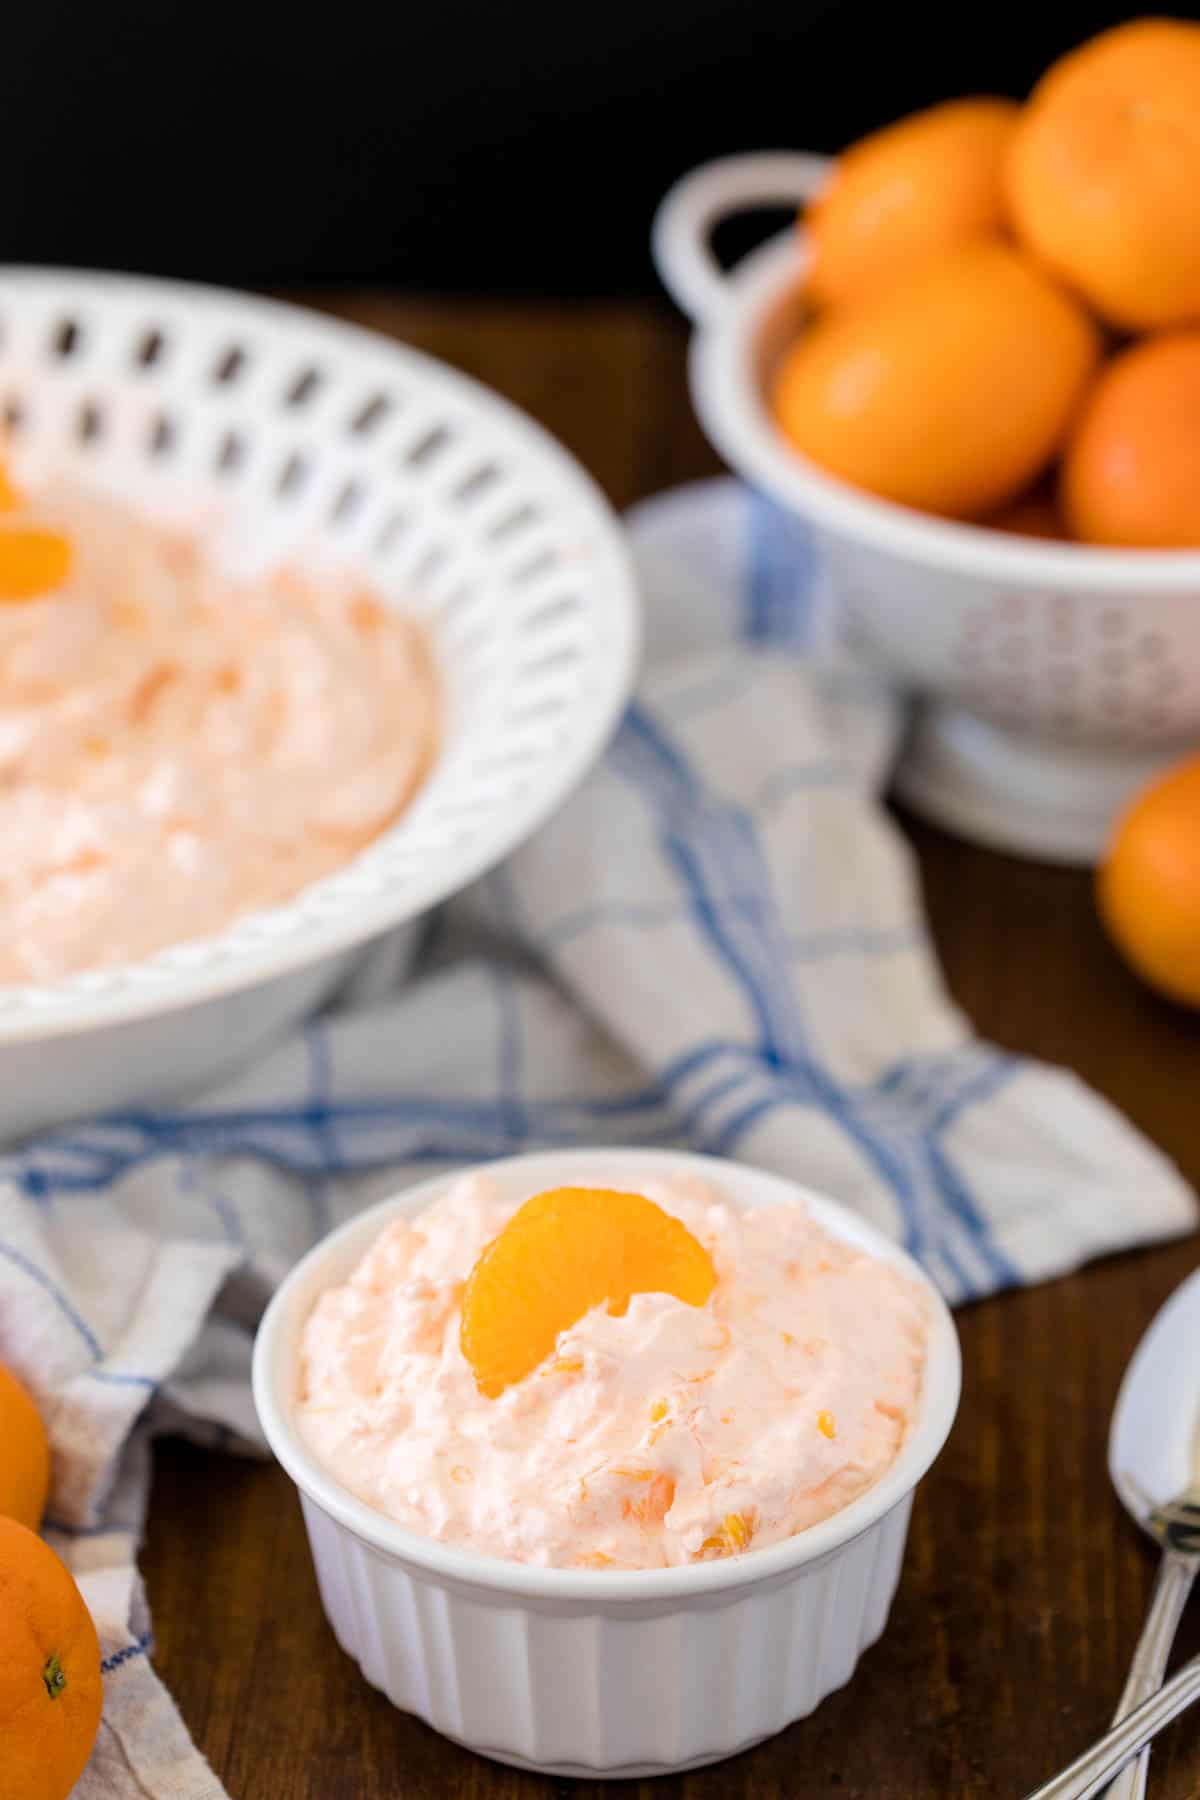 Orange Creamsicle Salad - The fluffiest dessert! You'll dream about your childhood ice cream cravings with this creamy fruit salad with cottage cheese, Jello, and mandarin oranges.